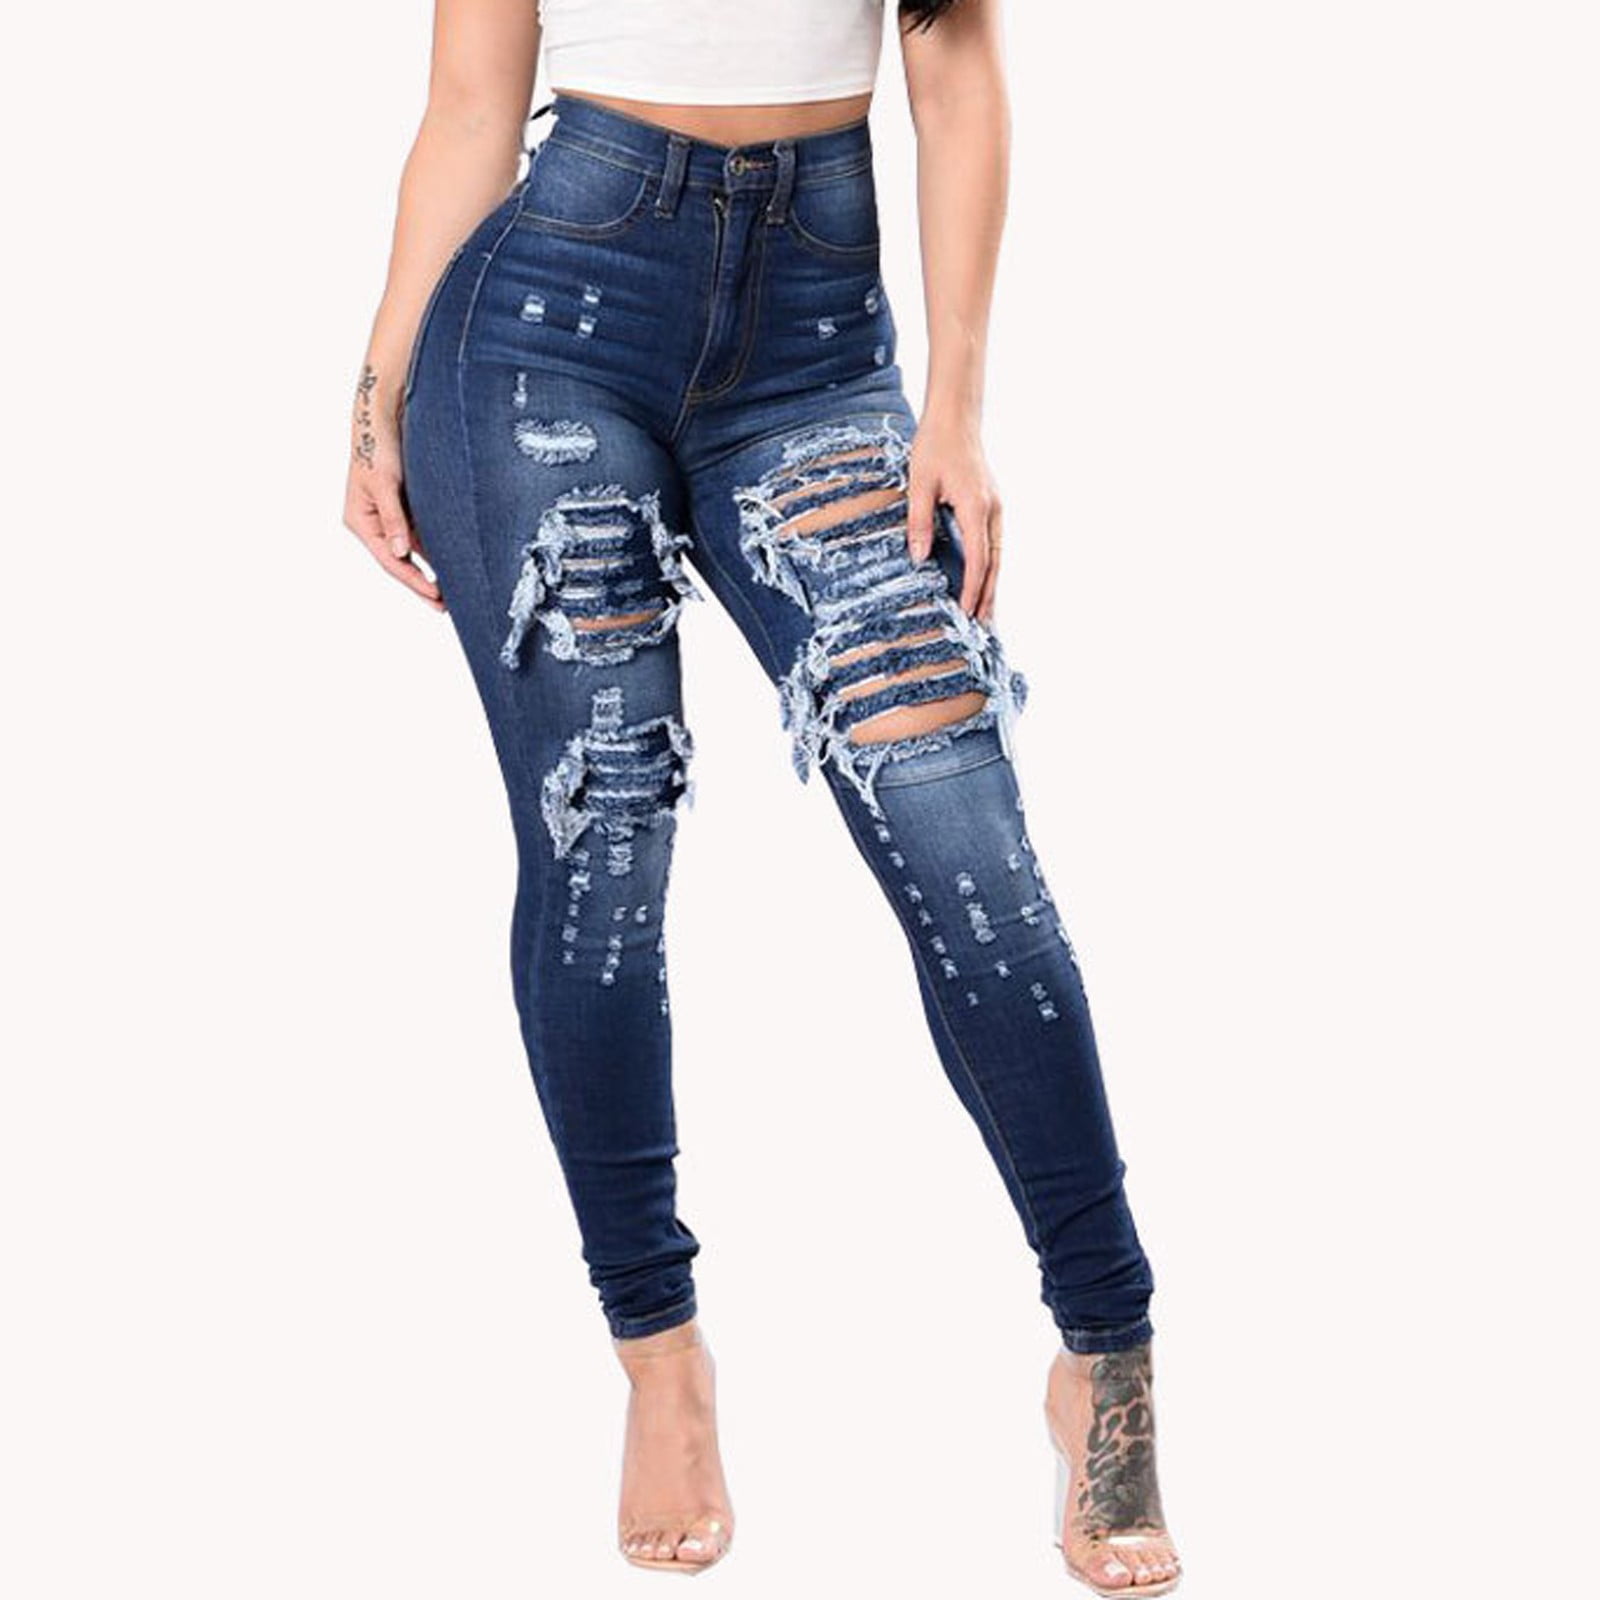 ZKCCNUK Plus Mom Jeans Women's Fashion Sexy High Waist Torns Solid Color Skinny Jeans Long Pants Summer Beach Casual on Clearance Walmart.com